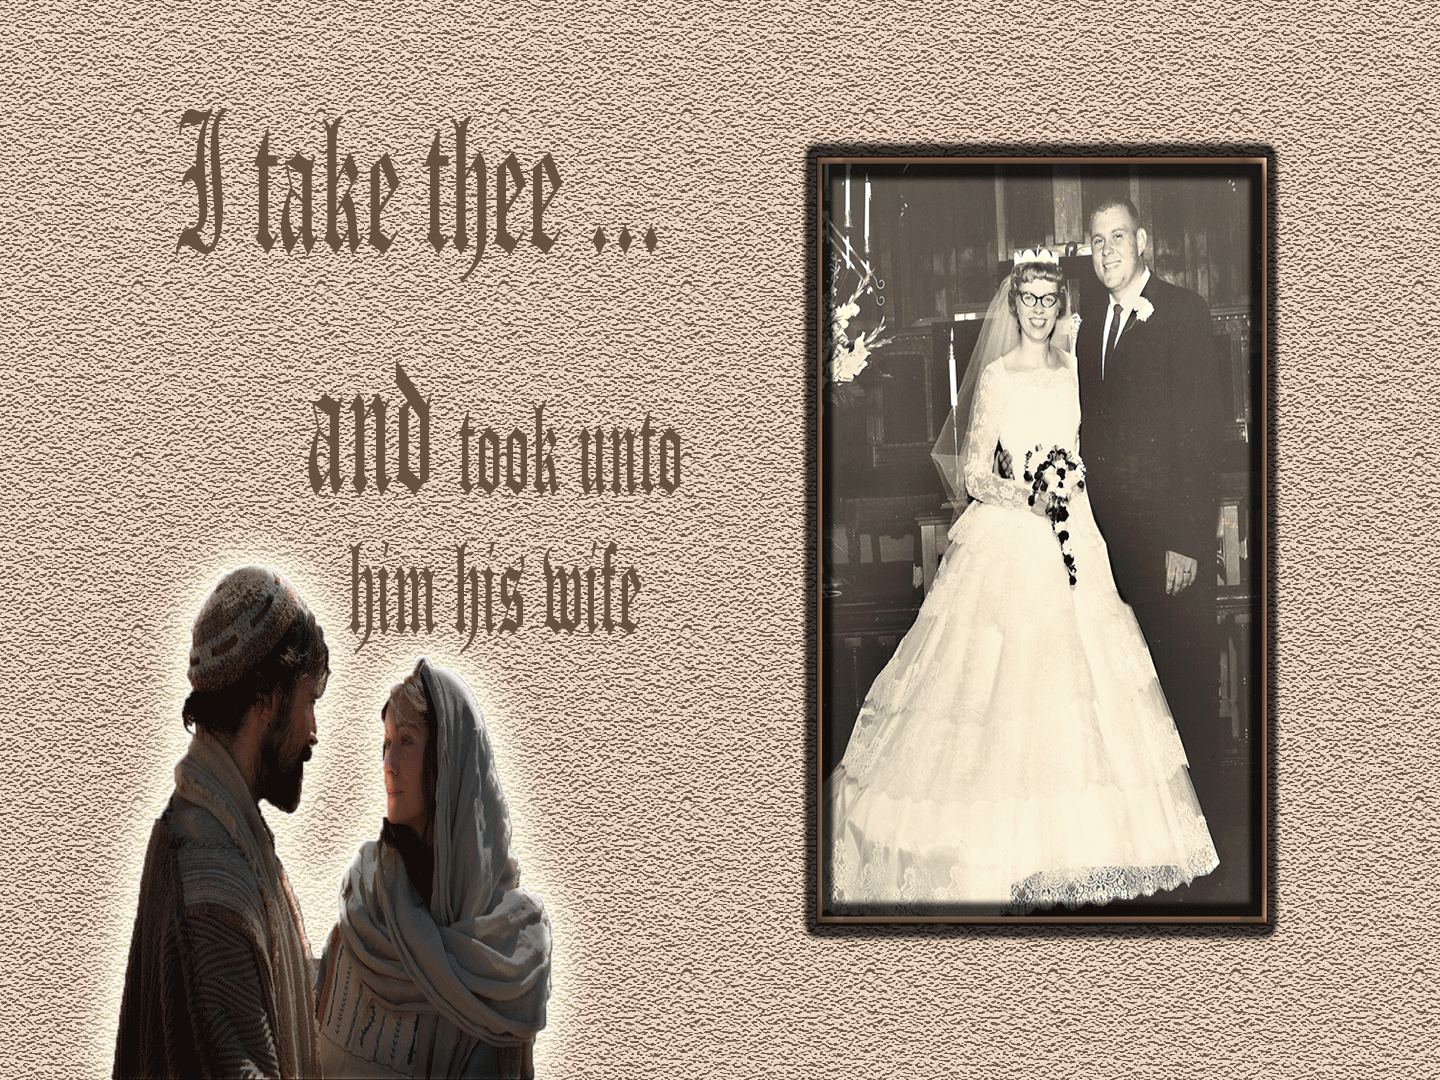 Joseph & Mary I take thee... AND took unto him his wife; 2nd image of real wedding today